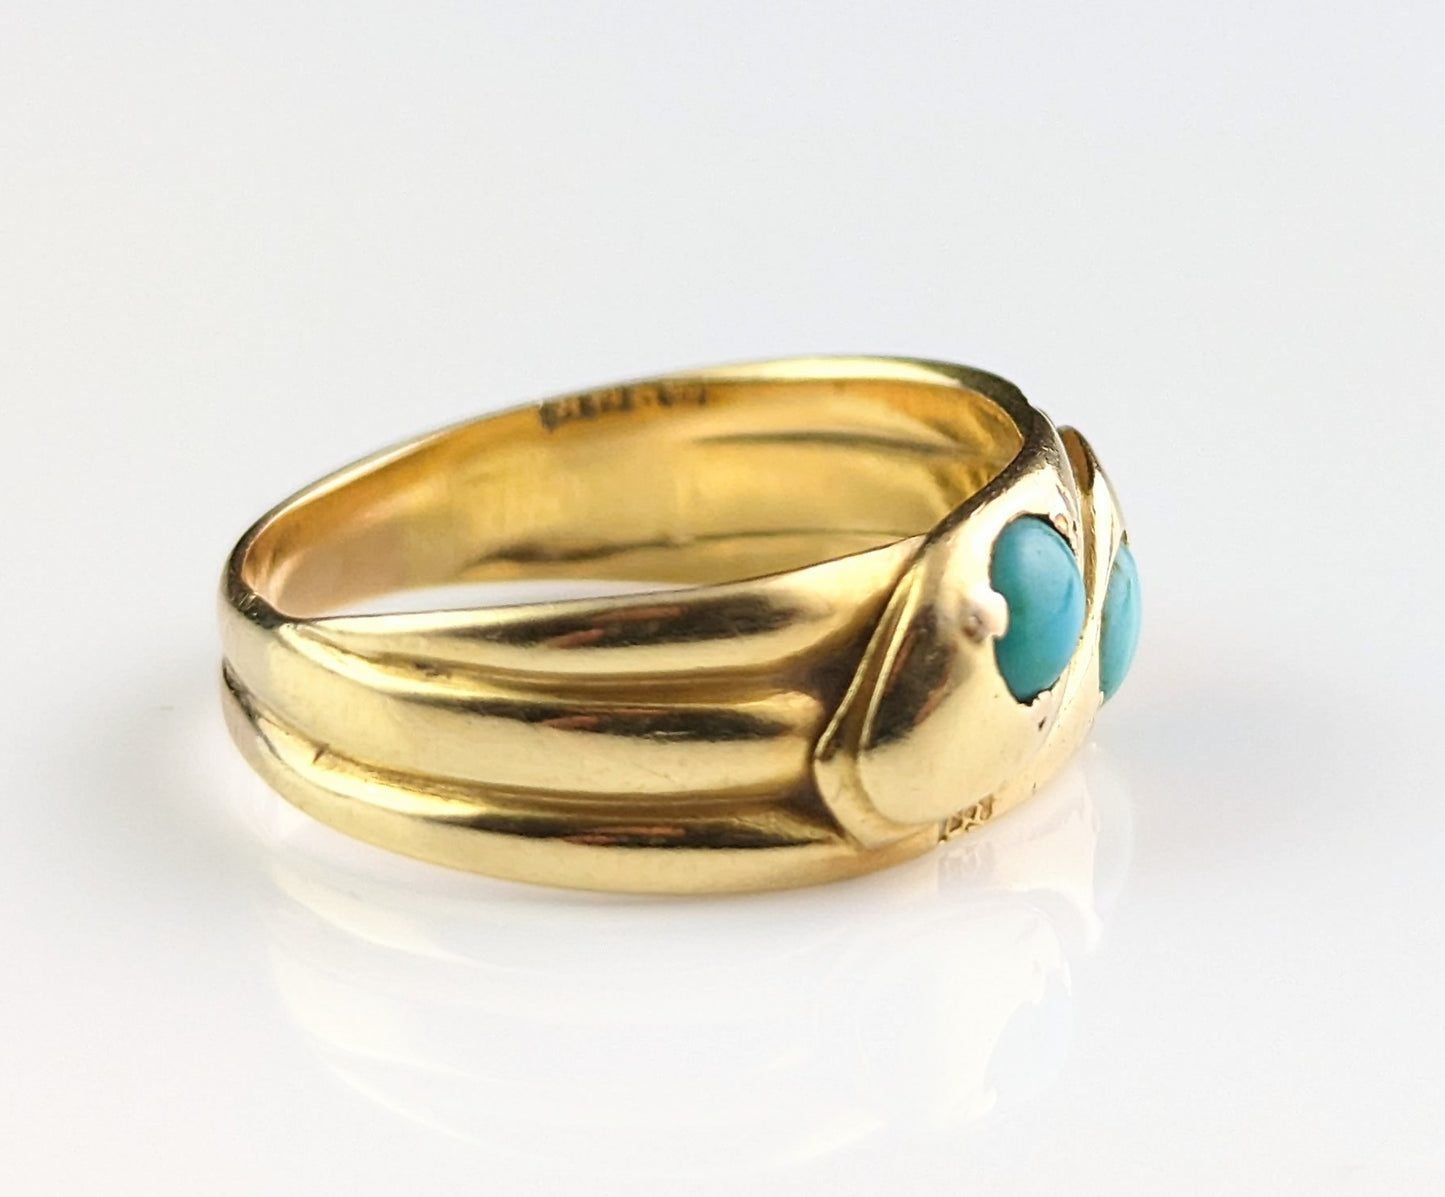 Antique 18ct gold double snake ring, Turquoise, Victorian